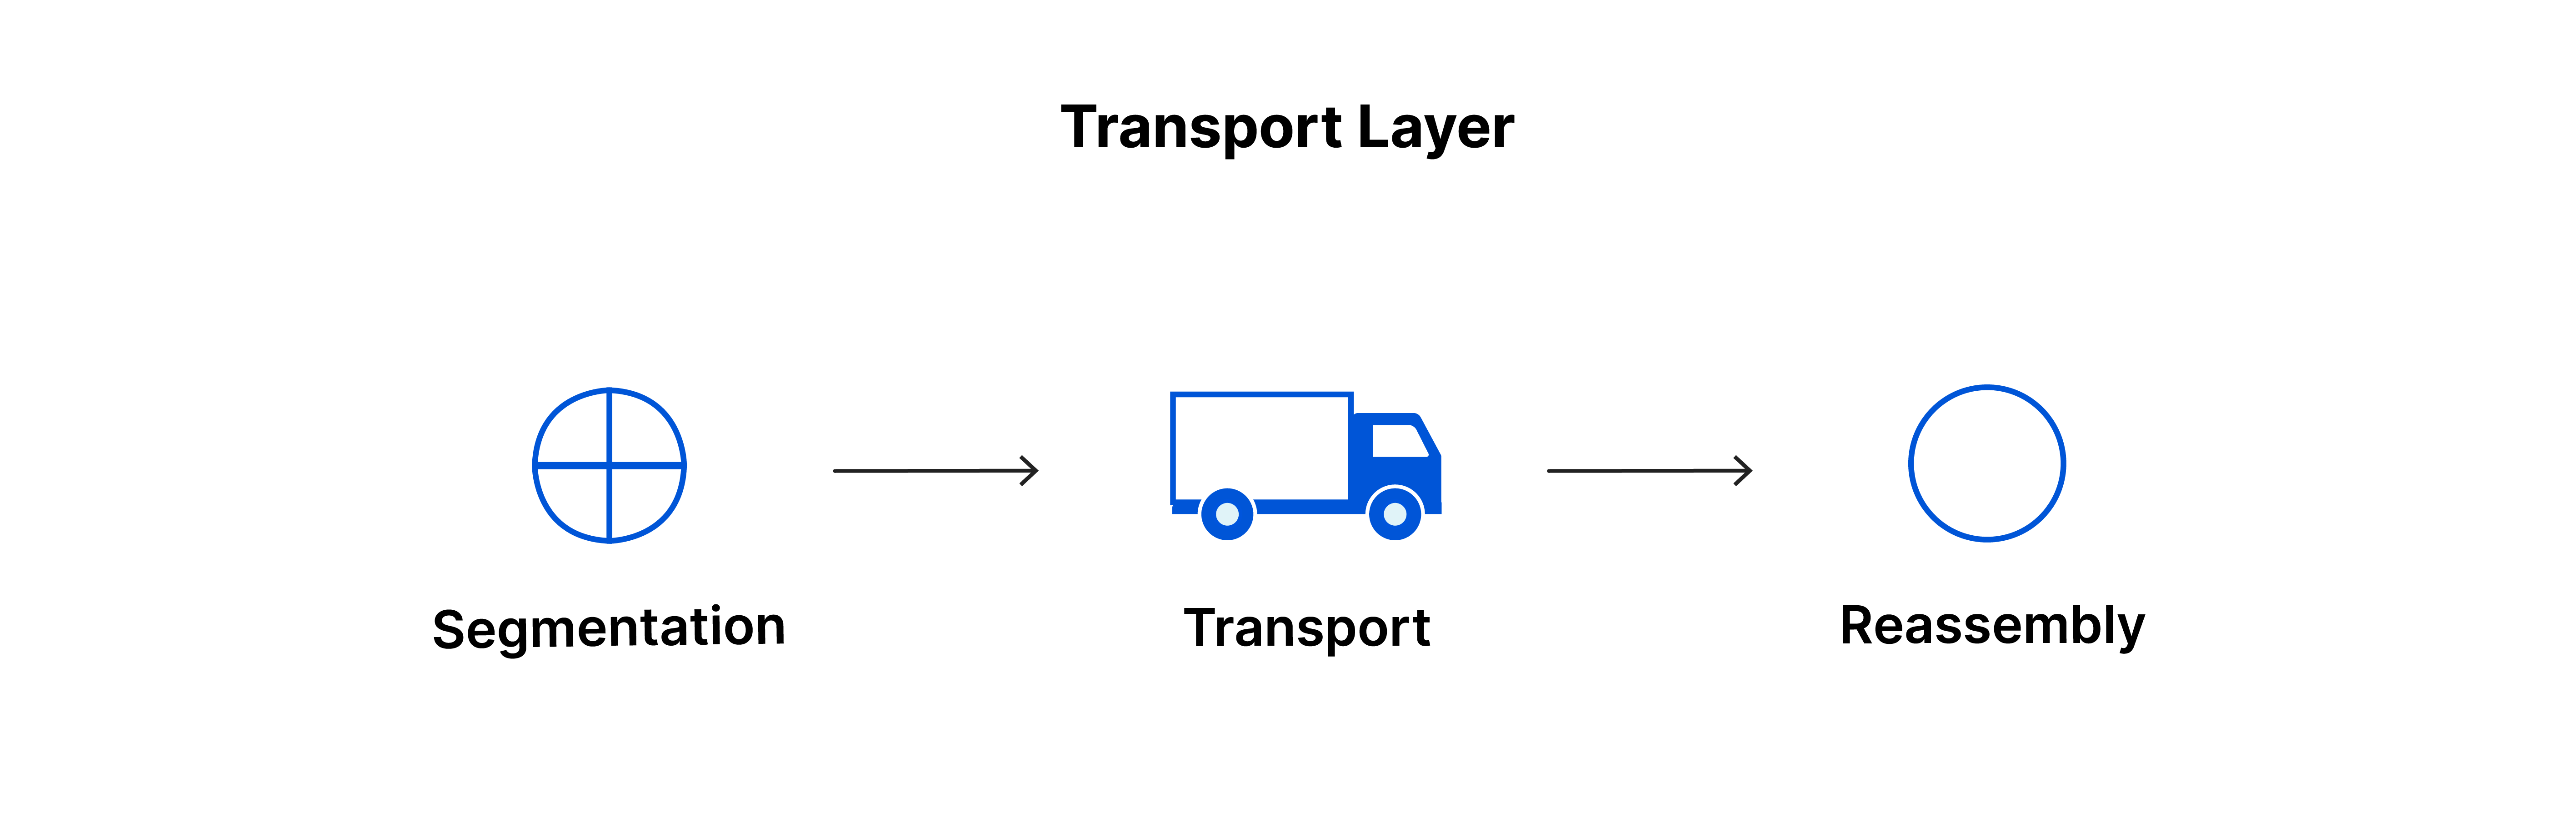 The Transport Layer: segment, transport, reassembly